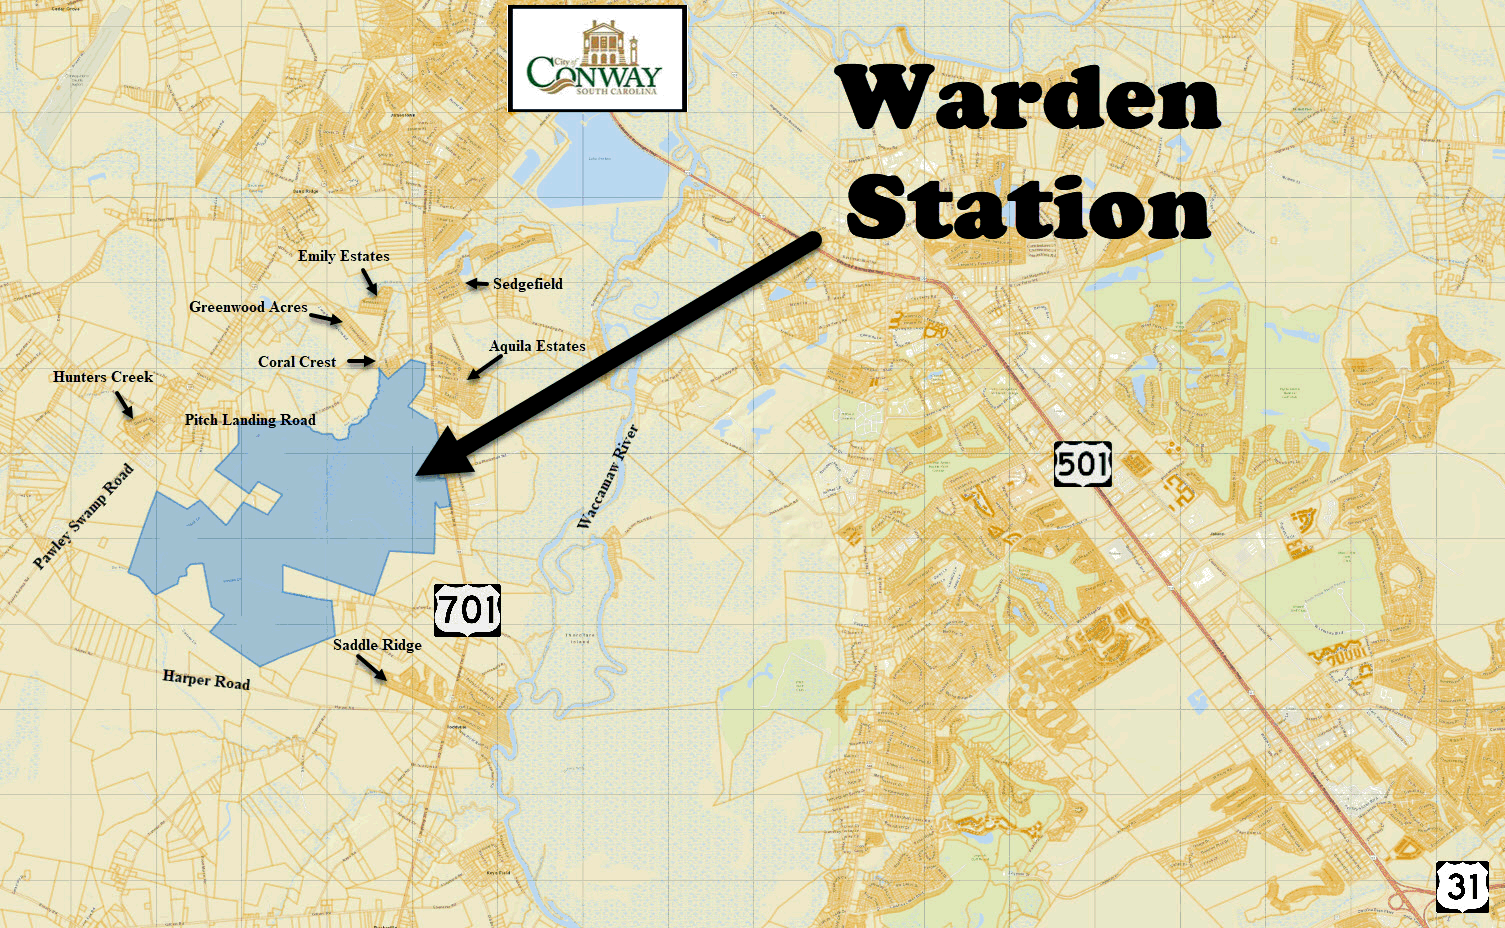 New community named Warden Station in Conway